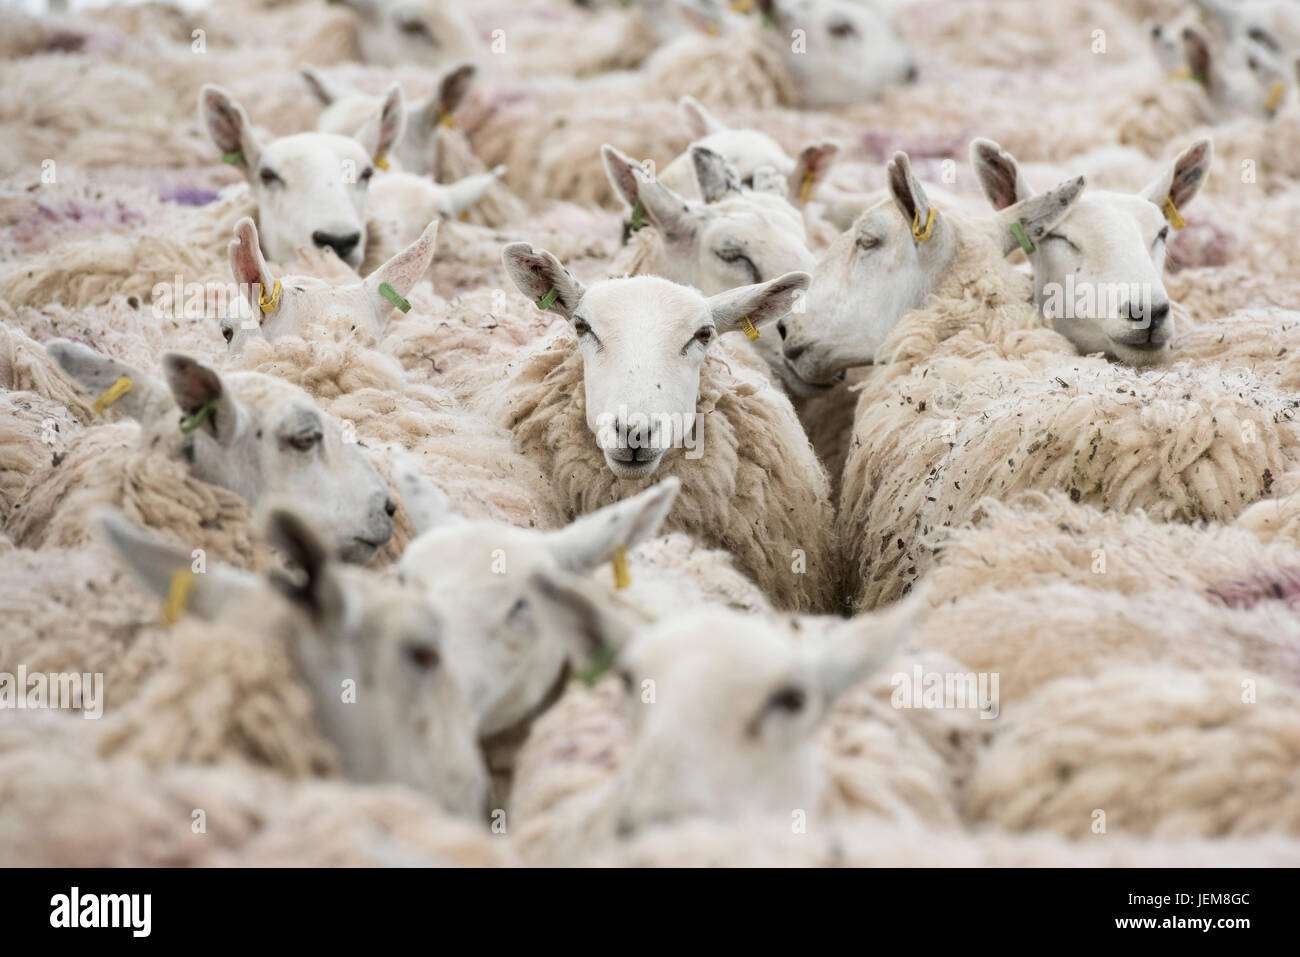 Ovis aries. Flock of Sheep in a pen waiting for shearing at an Agricultural show. UK Stock Photo